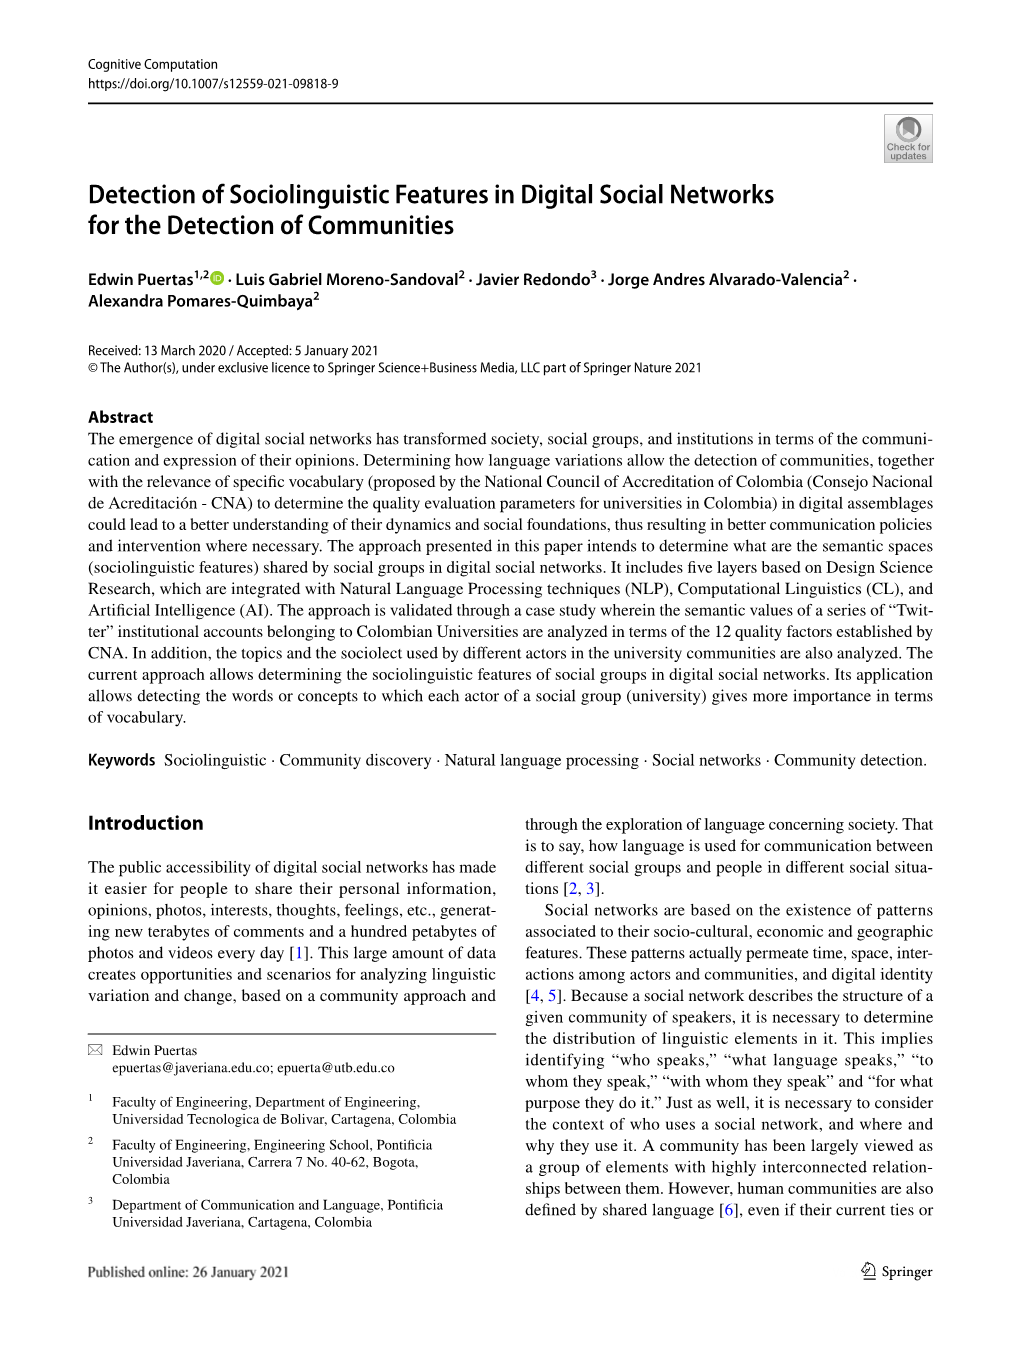 Detection of Sociolinguistic Features in Digital Social Networks for the Detection of Communities